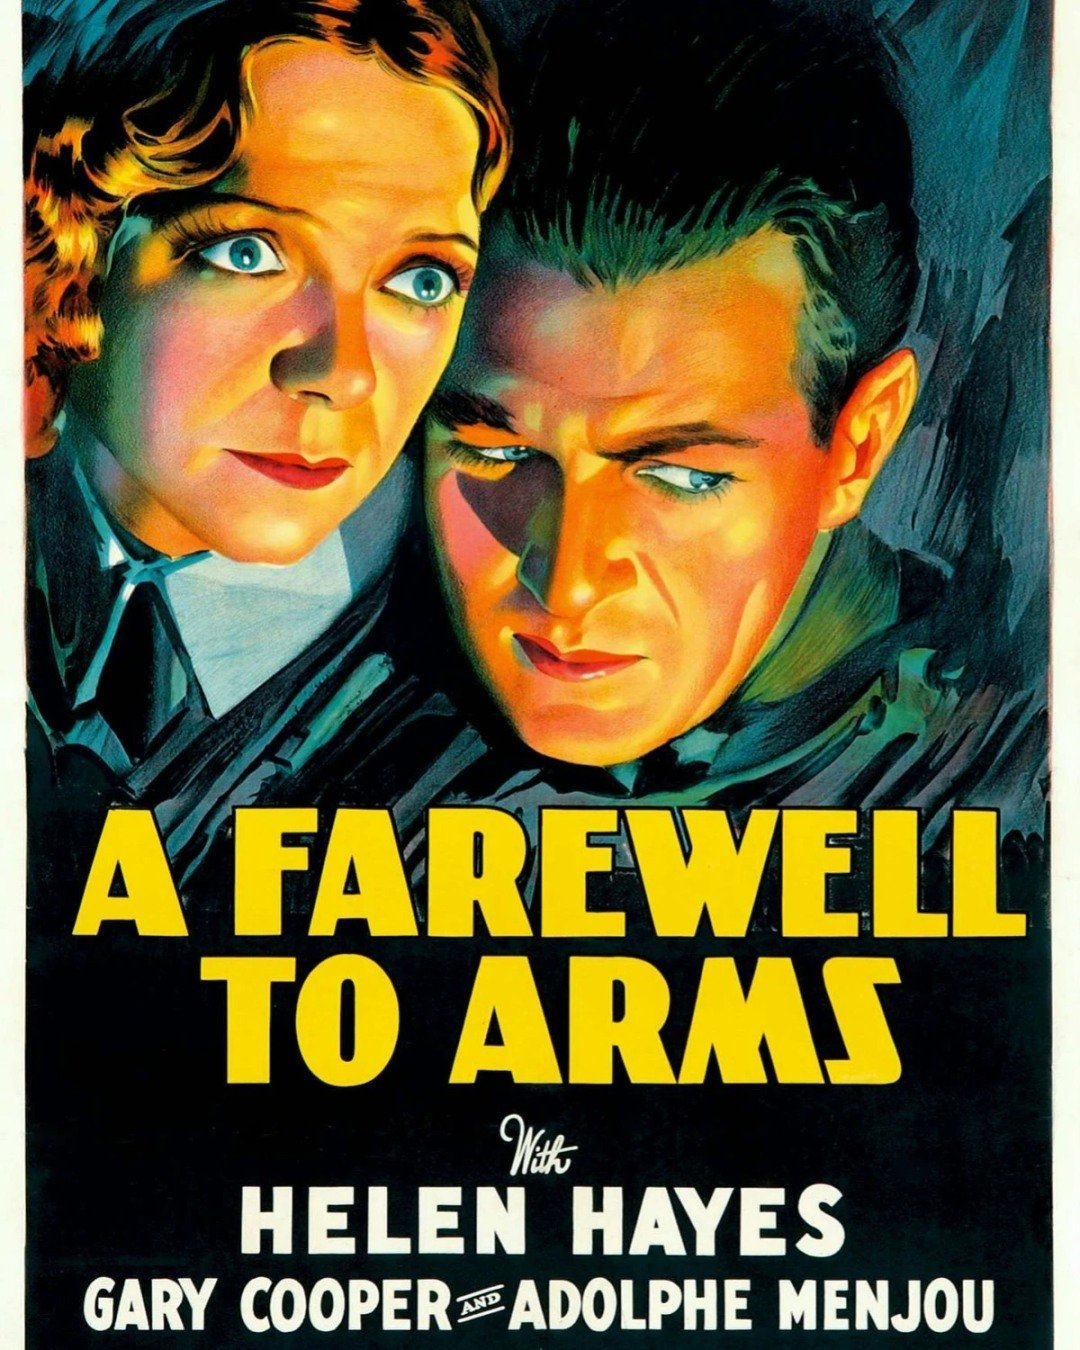 Embark on a cinematic odyssey of love and war with Gary Cooper and Helen Hayes in &quot;A Farewell to Arms&quot;! 🎥✨

Set against the backdrop of World War I, this timeless adaptation of Ernest Hemingway's classic novel immerses viewers in a whirlwi